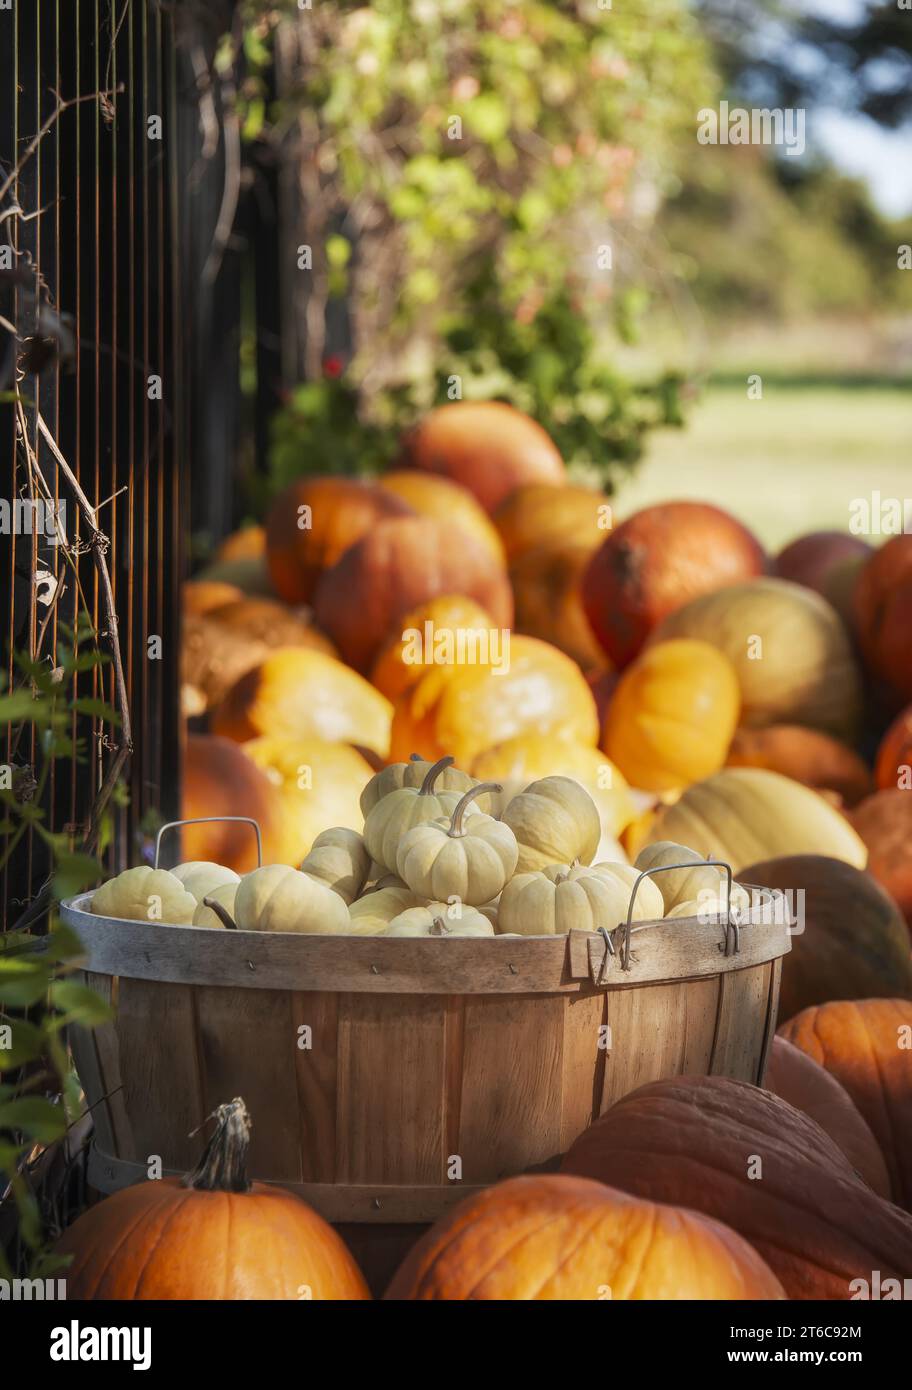 White mini pumpkins in a wood basket on a sunny autumn day in the garden. Basket surrounded by pumpkins. Autumn harvesting concept. Stock Photo